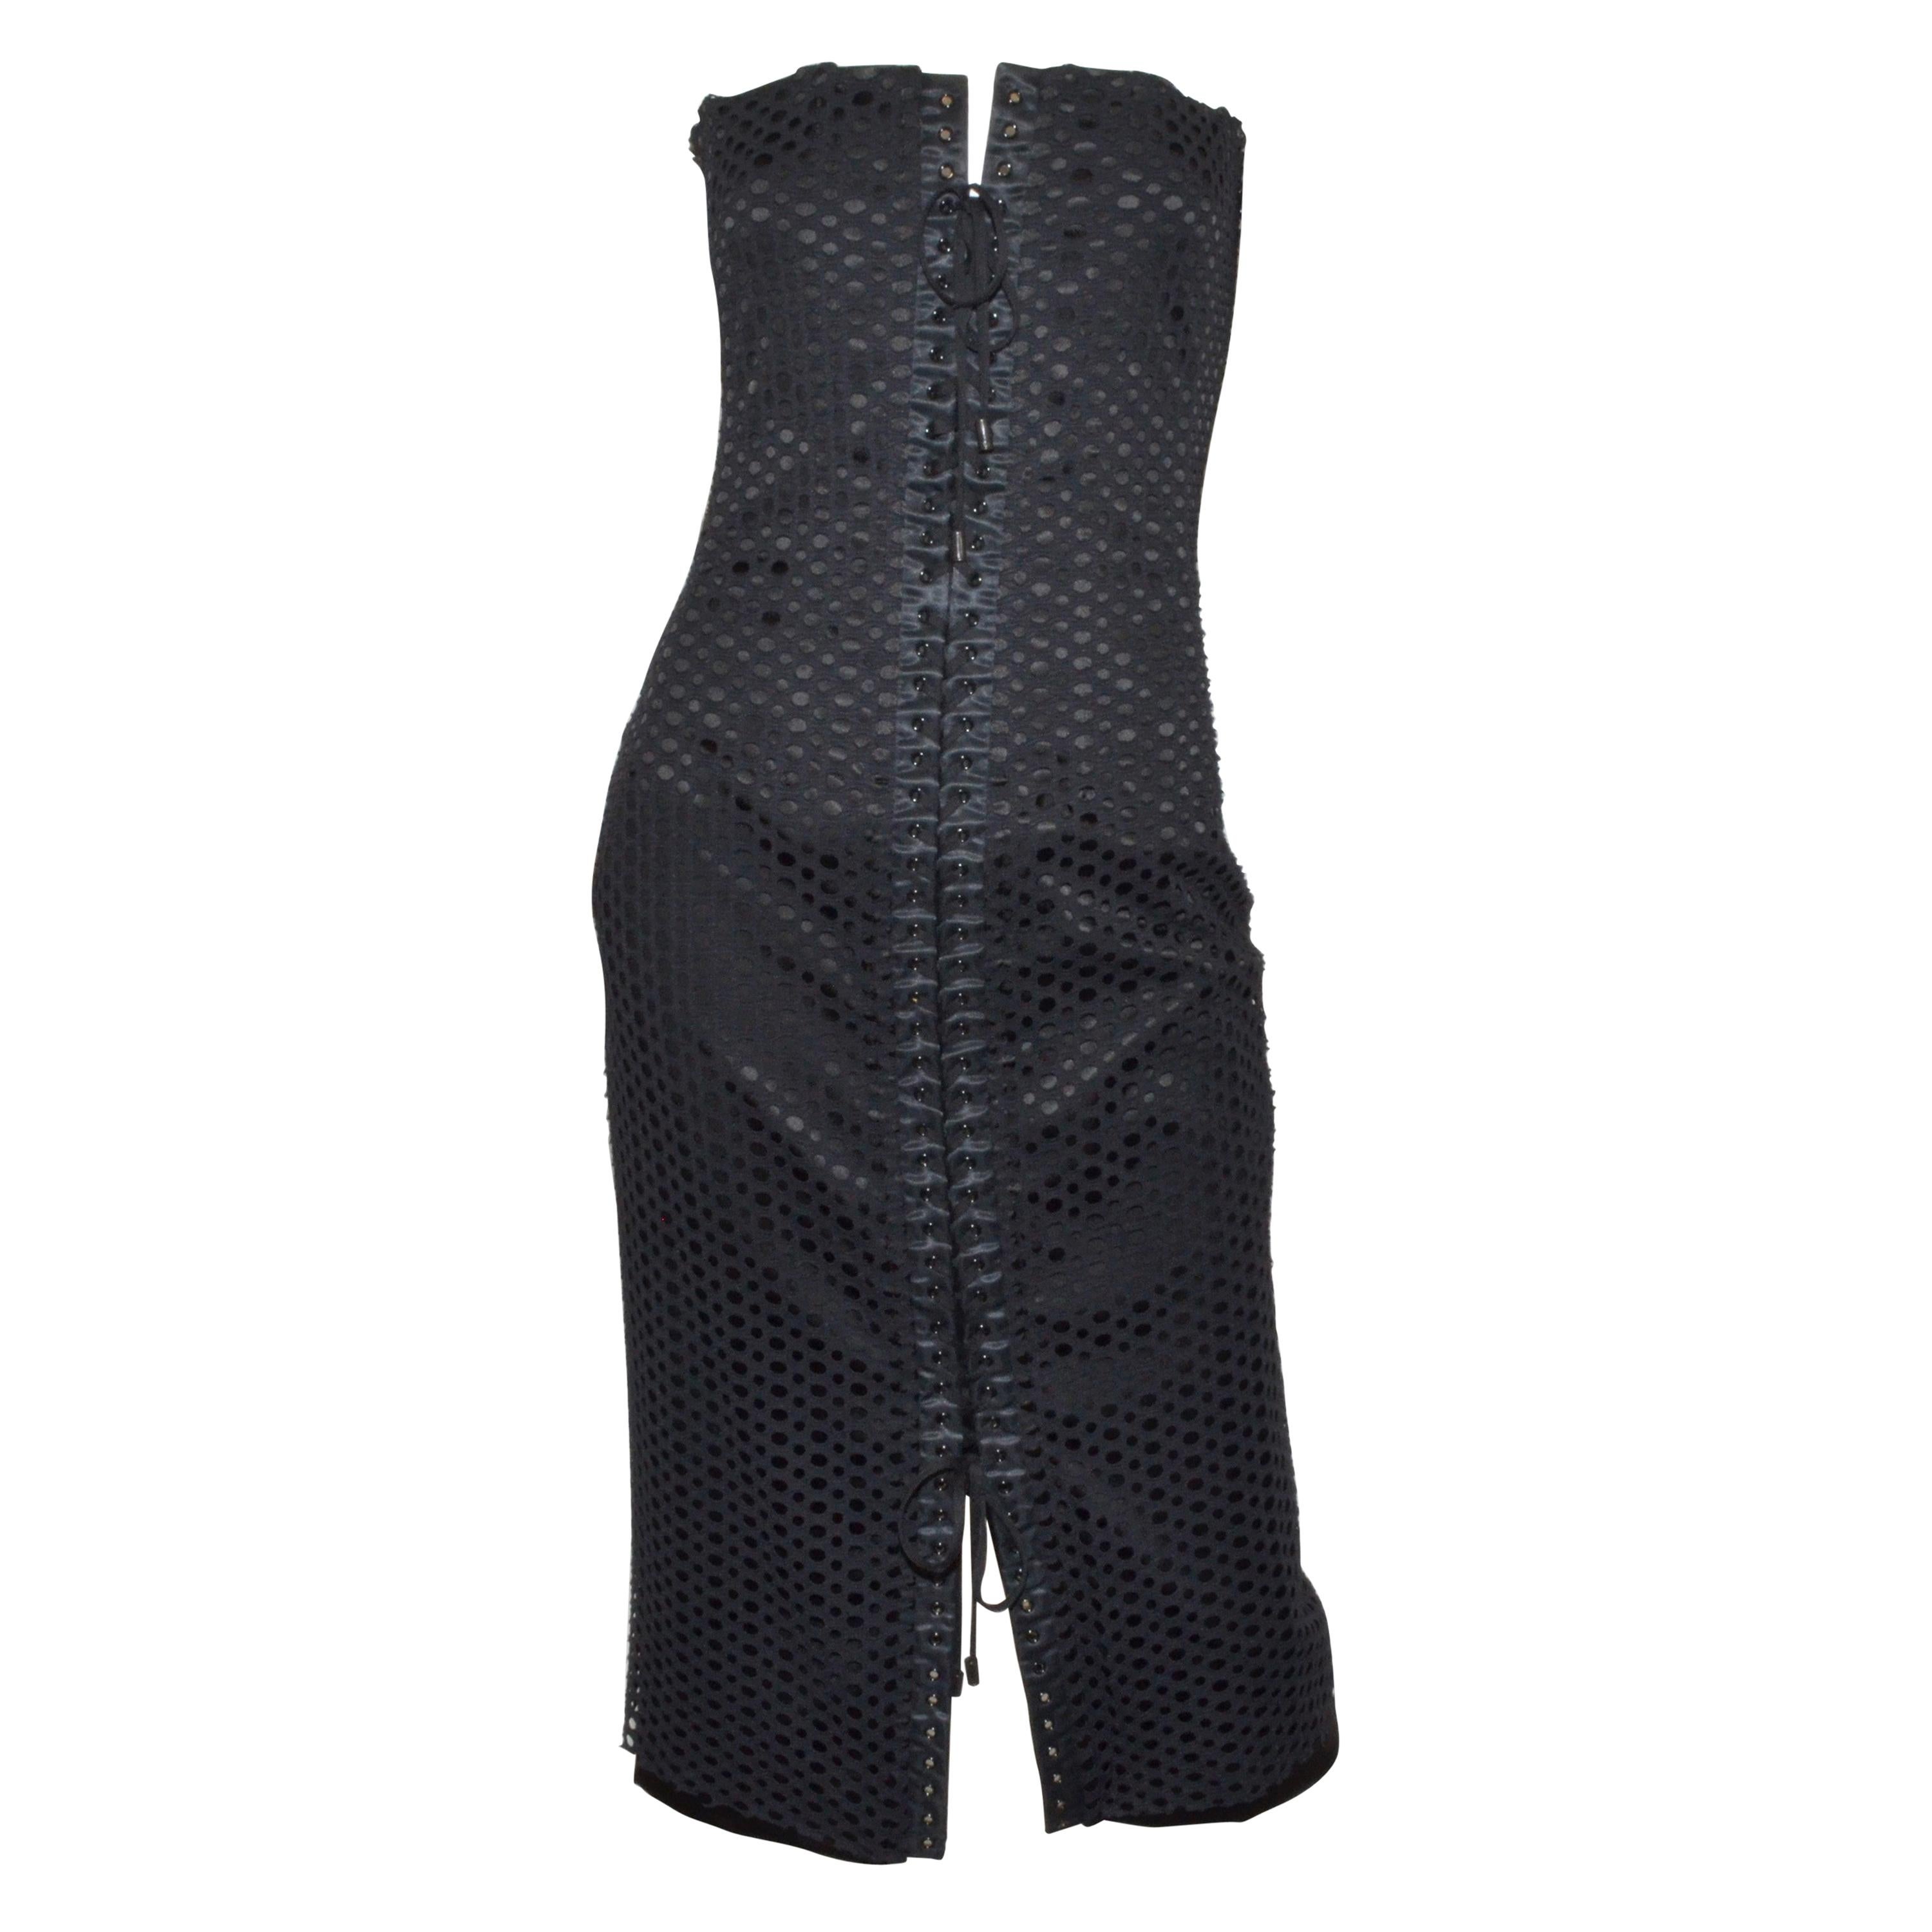 Dolce & Gabbana Black Eyelet Corset Dress with Lace-Up Tie